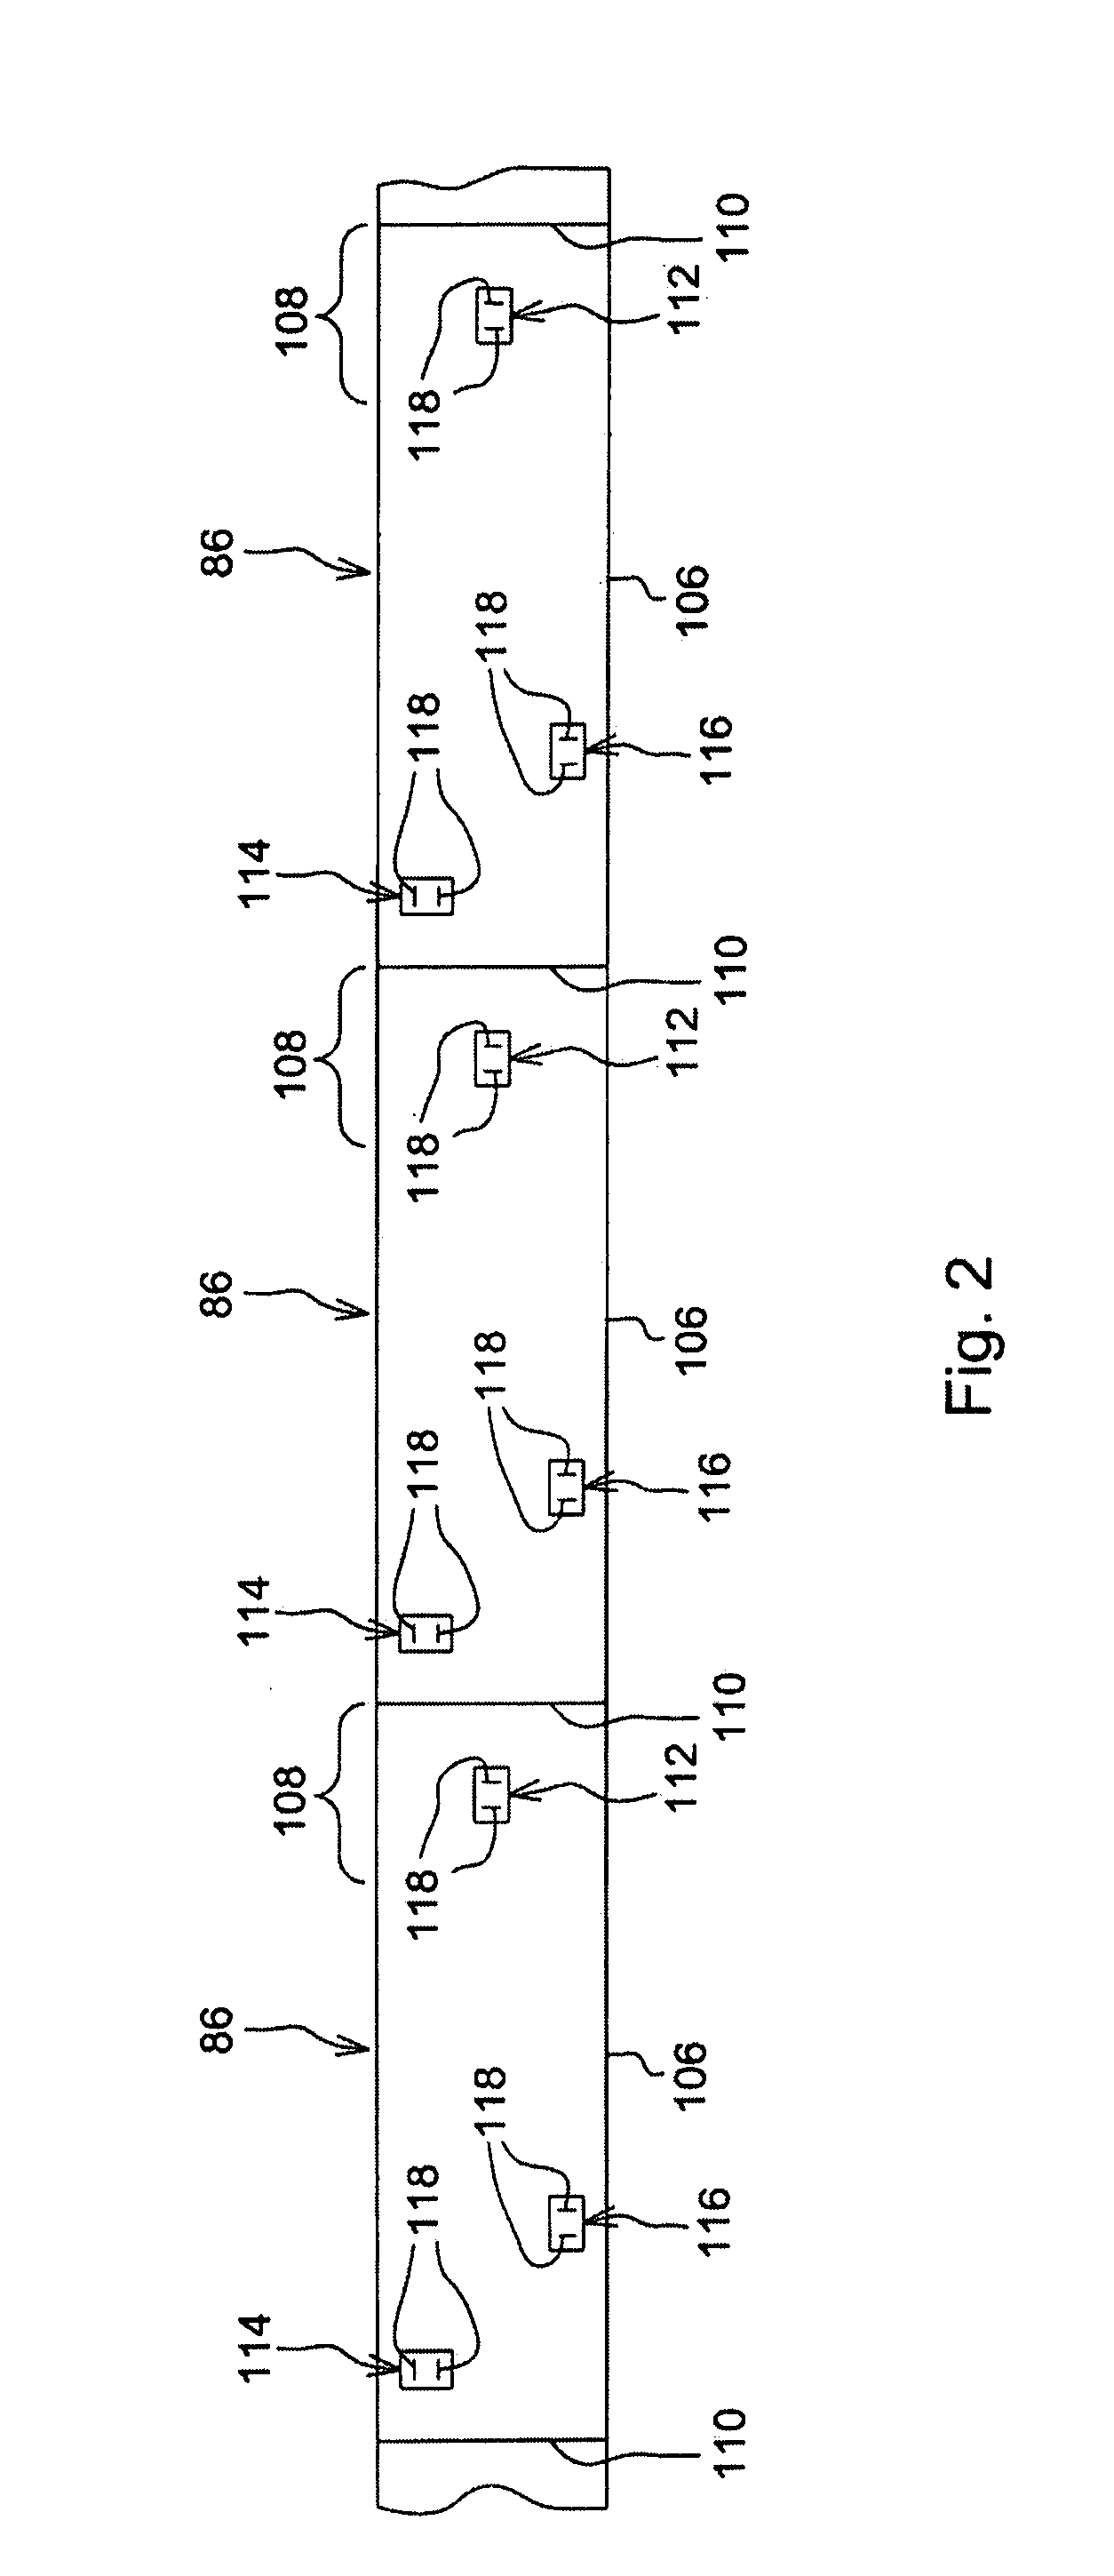 Cotton Harvester For Producing Modules Which Can Be Automatically Identified And Oriented